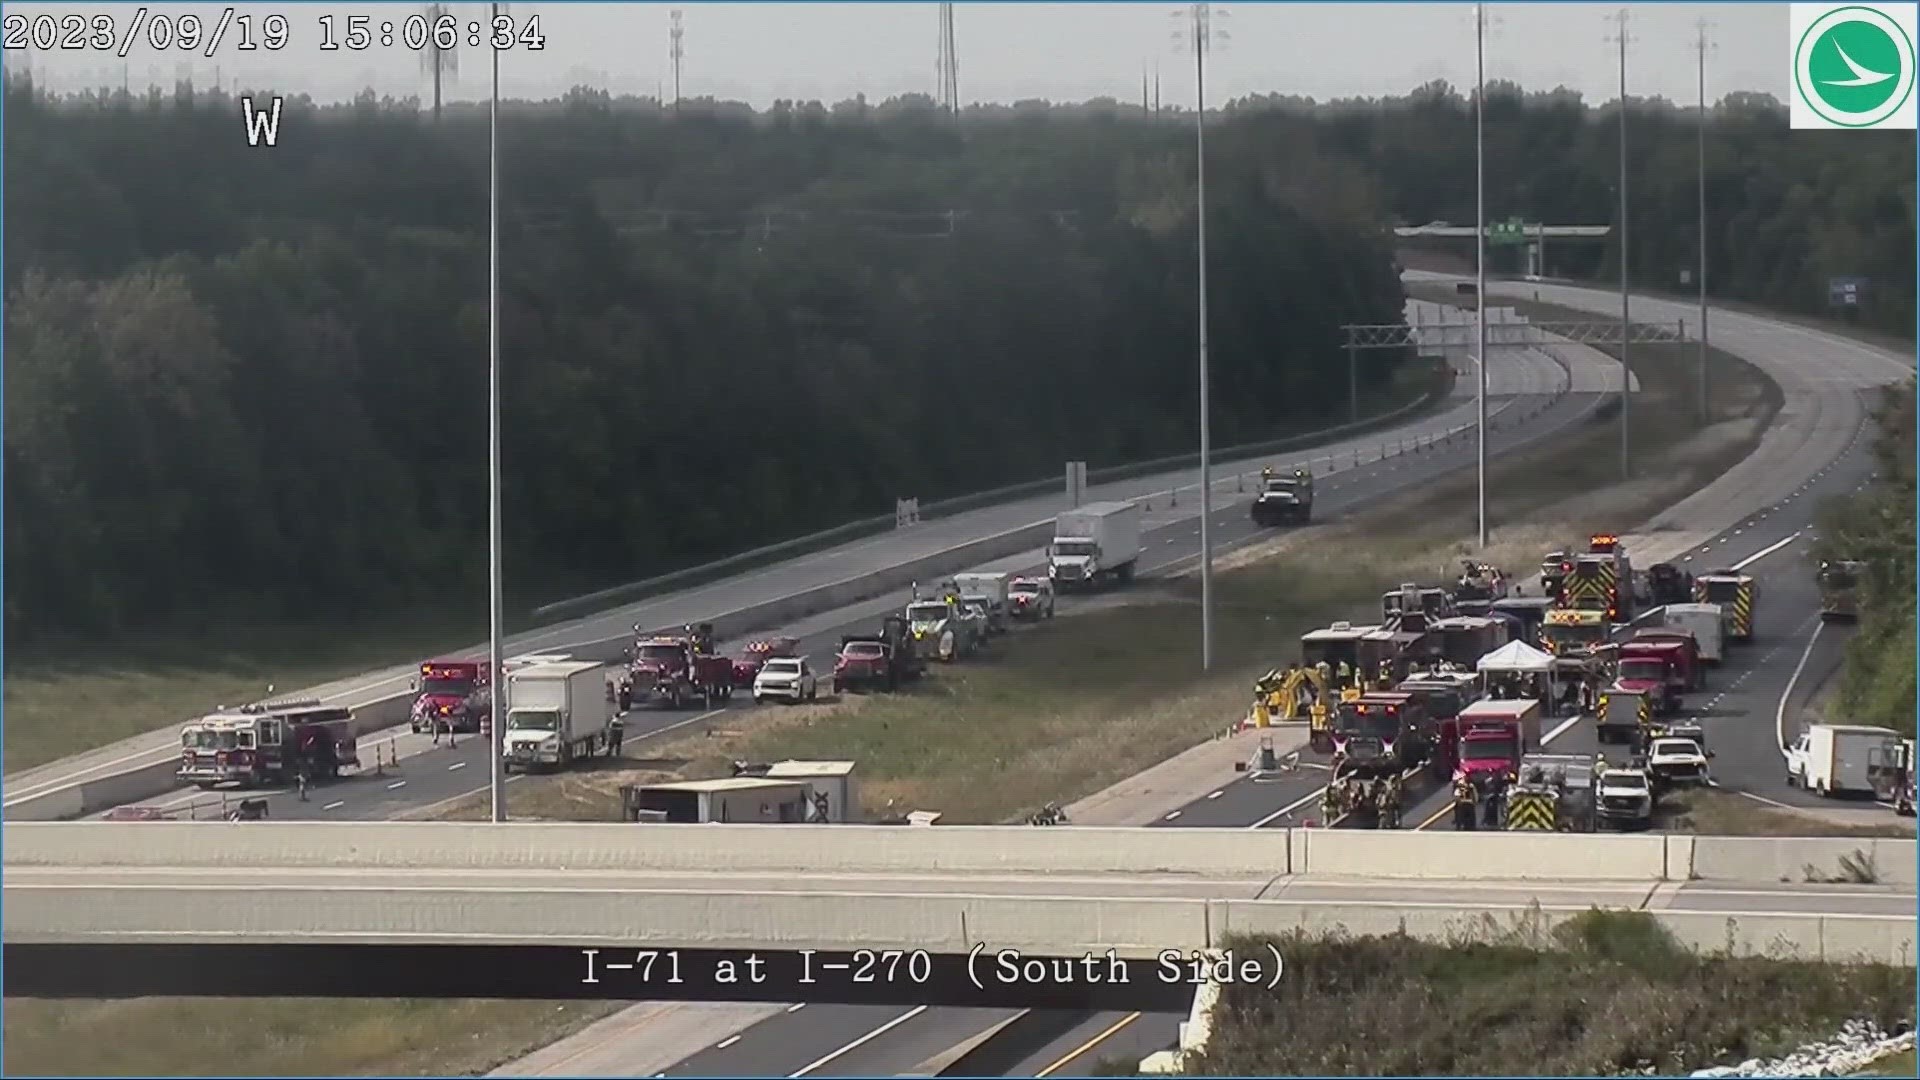 The Franklin County Sheriff's Office said I-270 eastbound at I-71 remains shut down due to a possible hazmat spill.